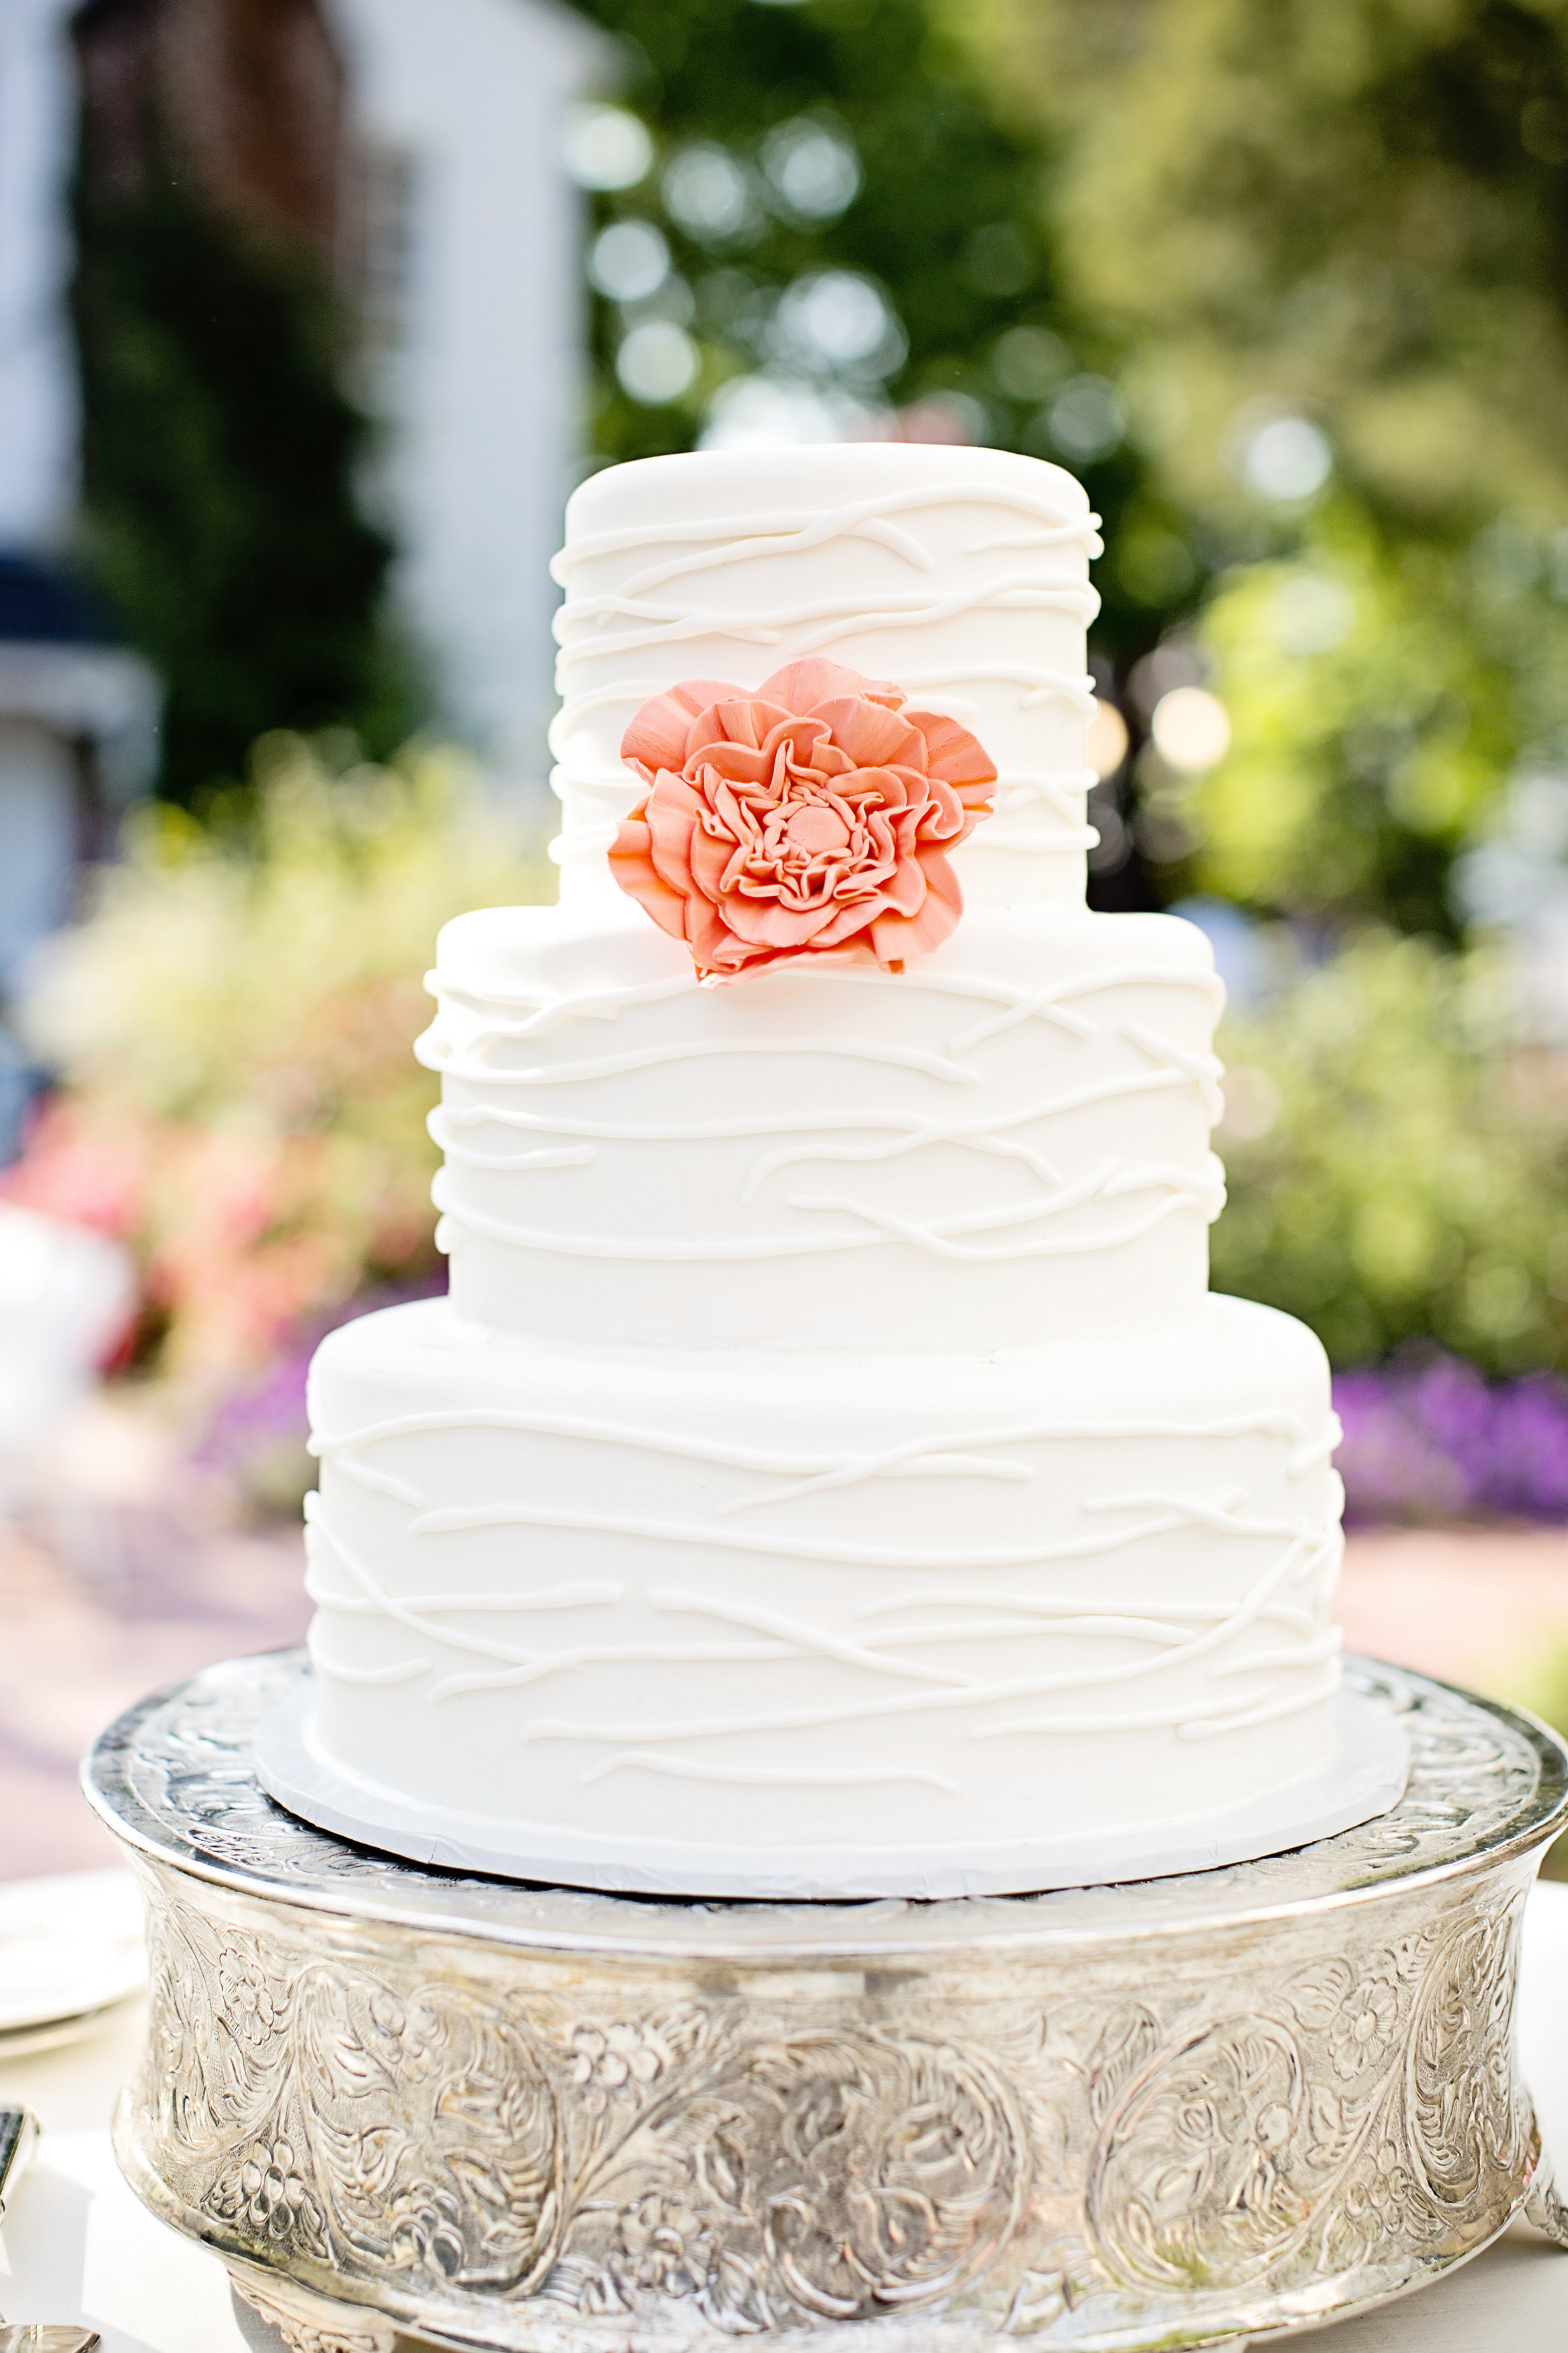 Simple Wedding Cakes For Small Wedding
 Plant a flower on the wedding cake